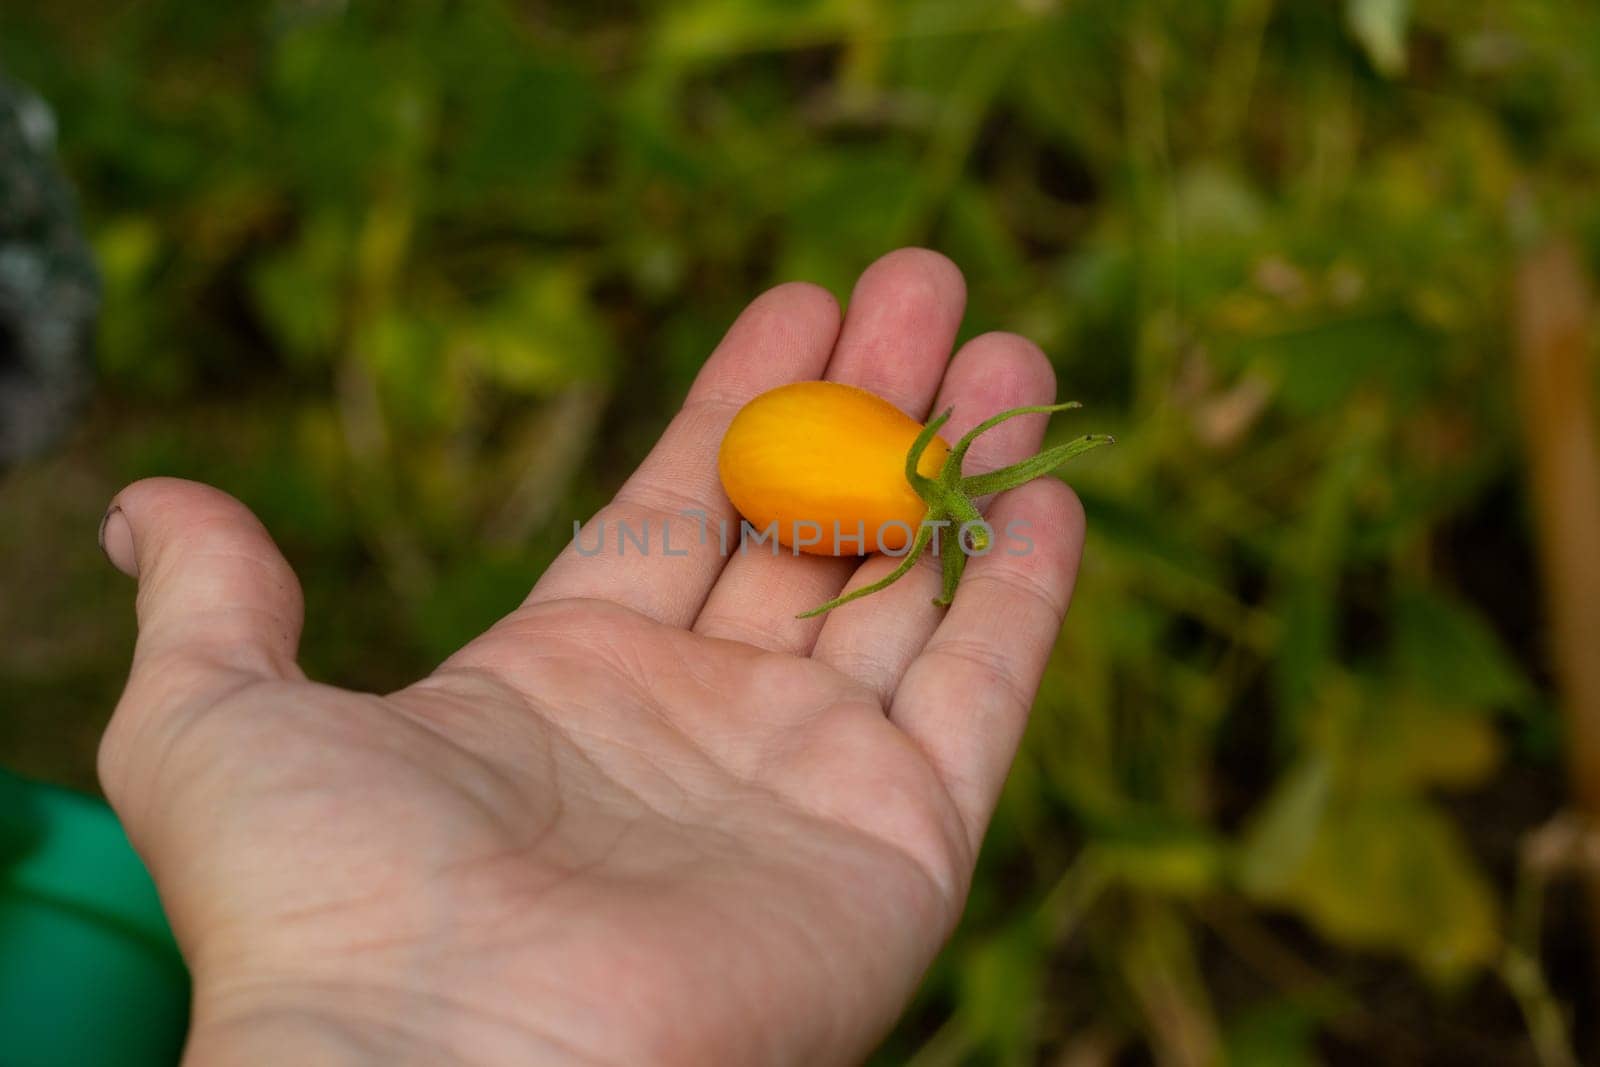 Yellow cherry tomato on an open palm. A by electrovenik